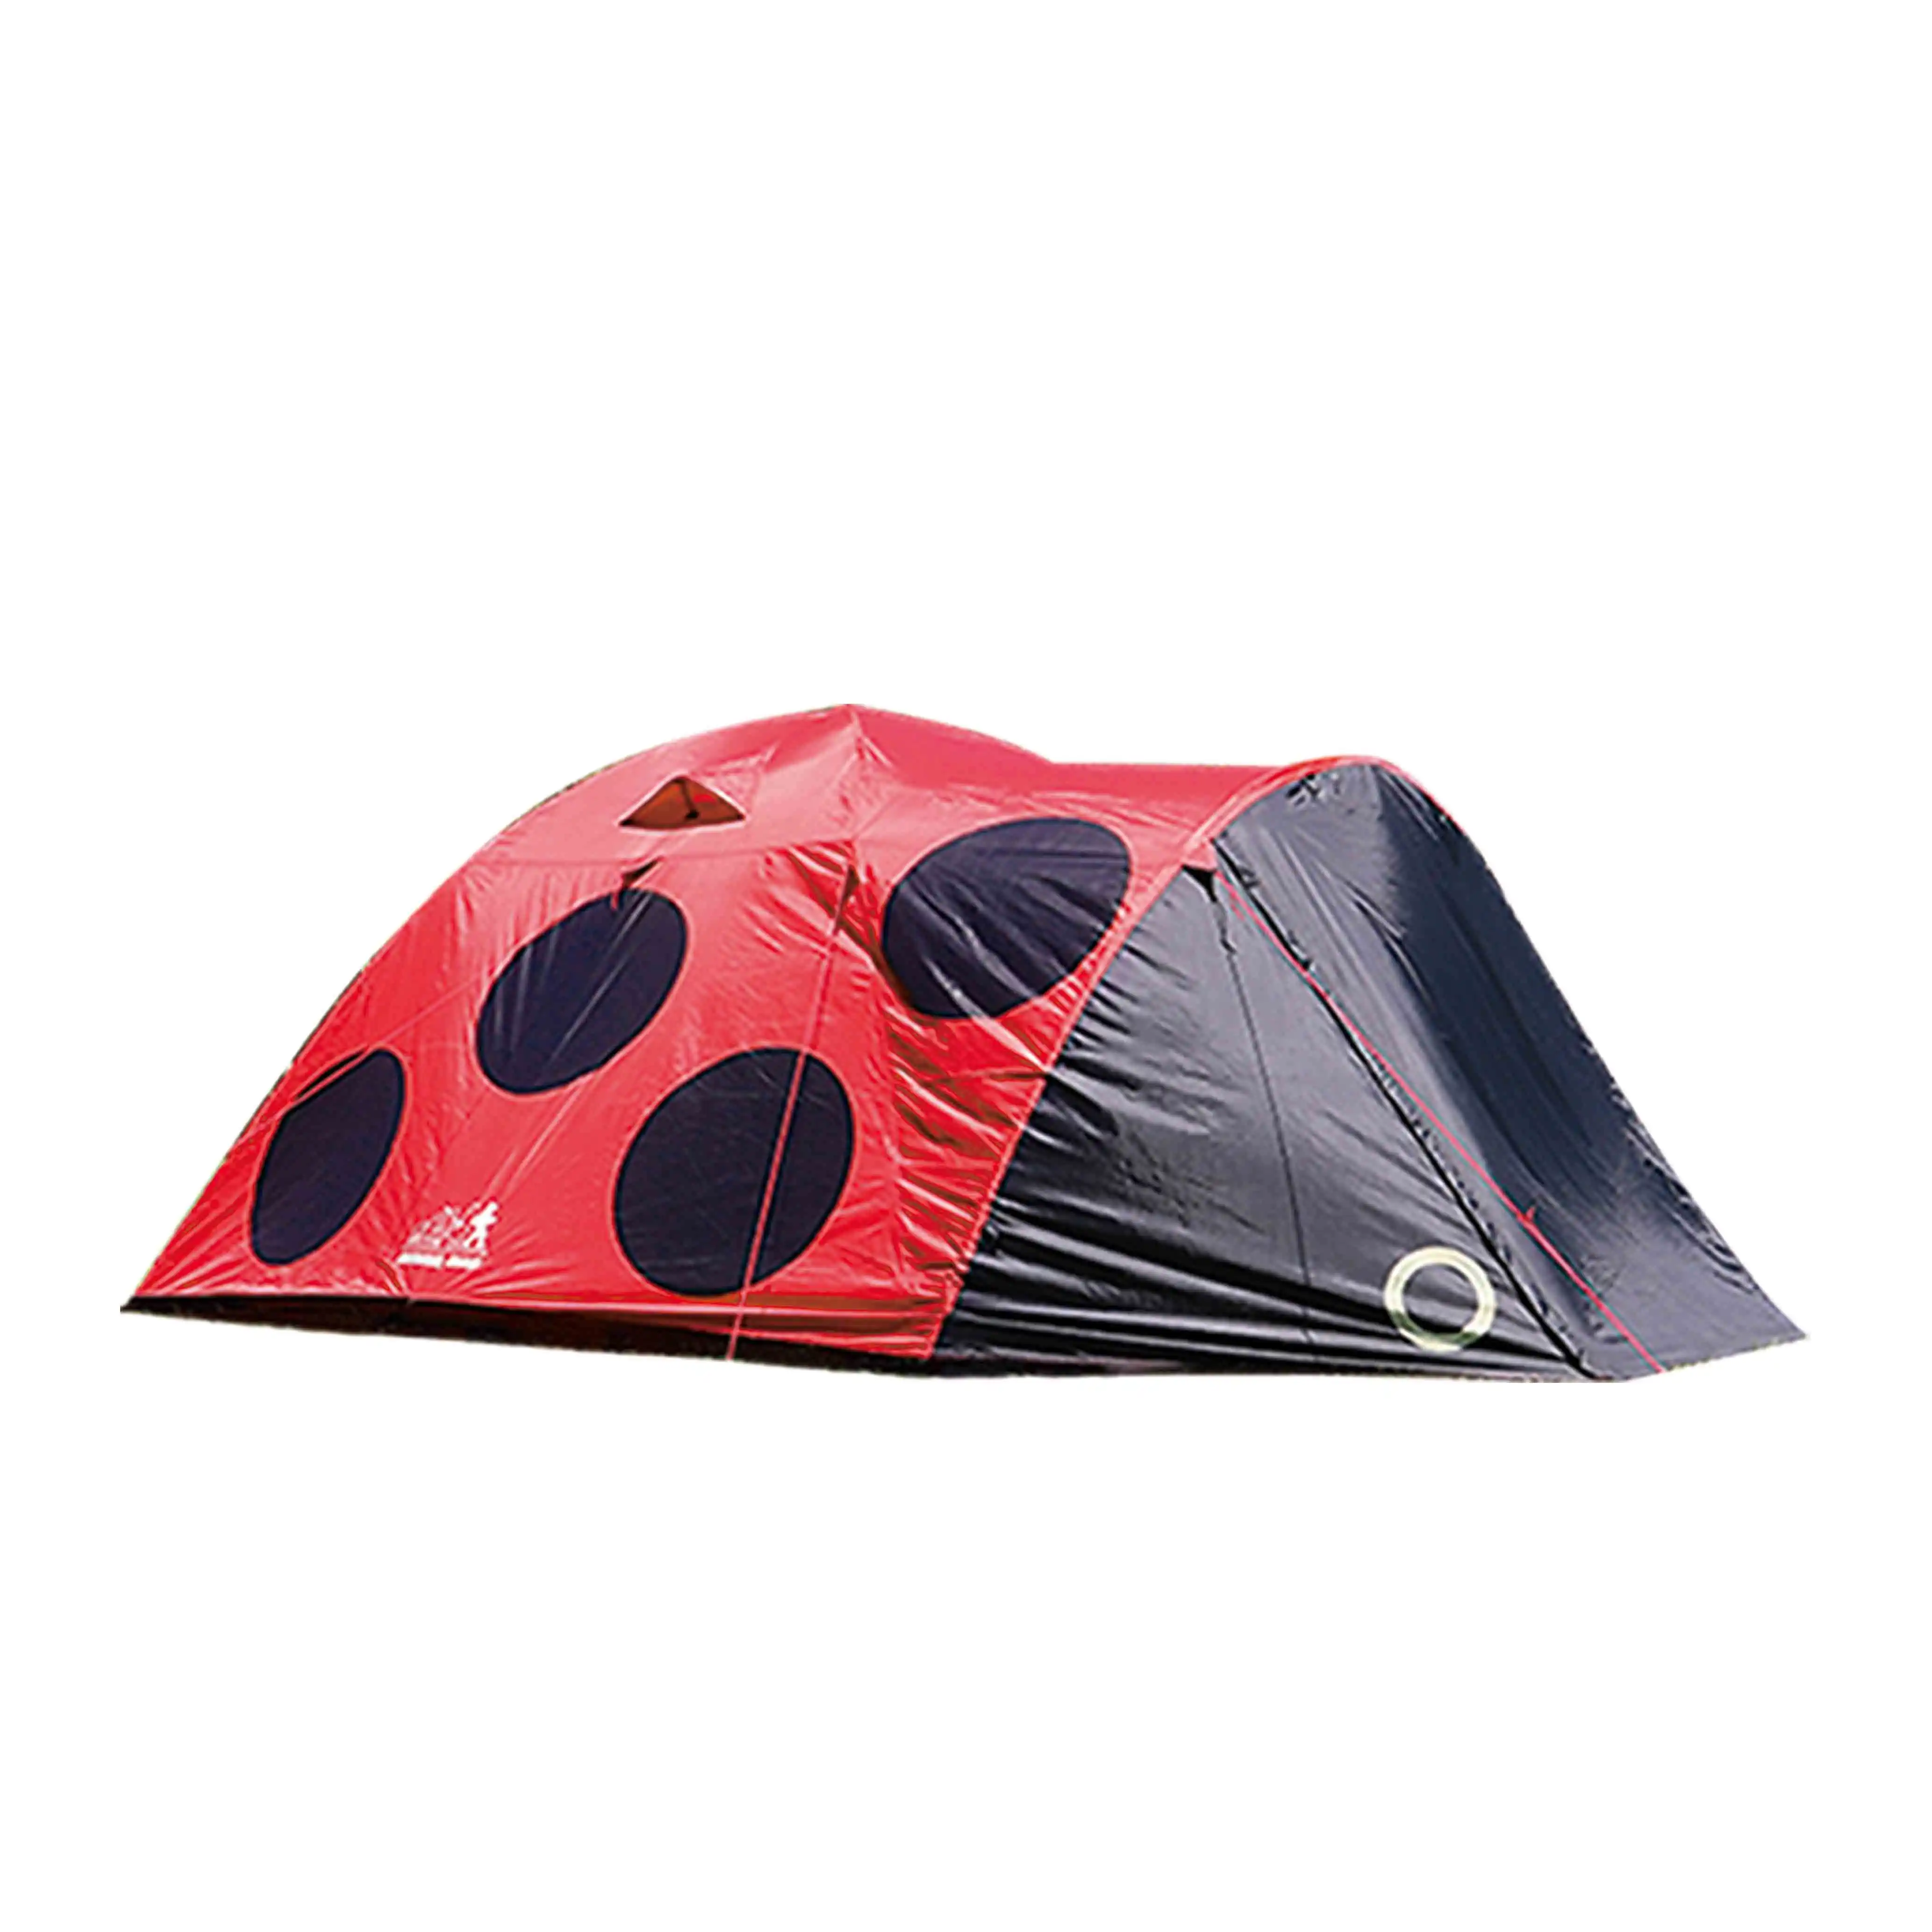 Family lady beetles tent camping 4-5 people tent waterproof outdoor tent